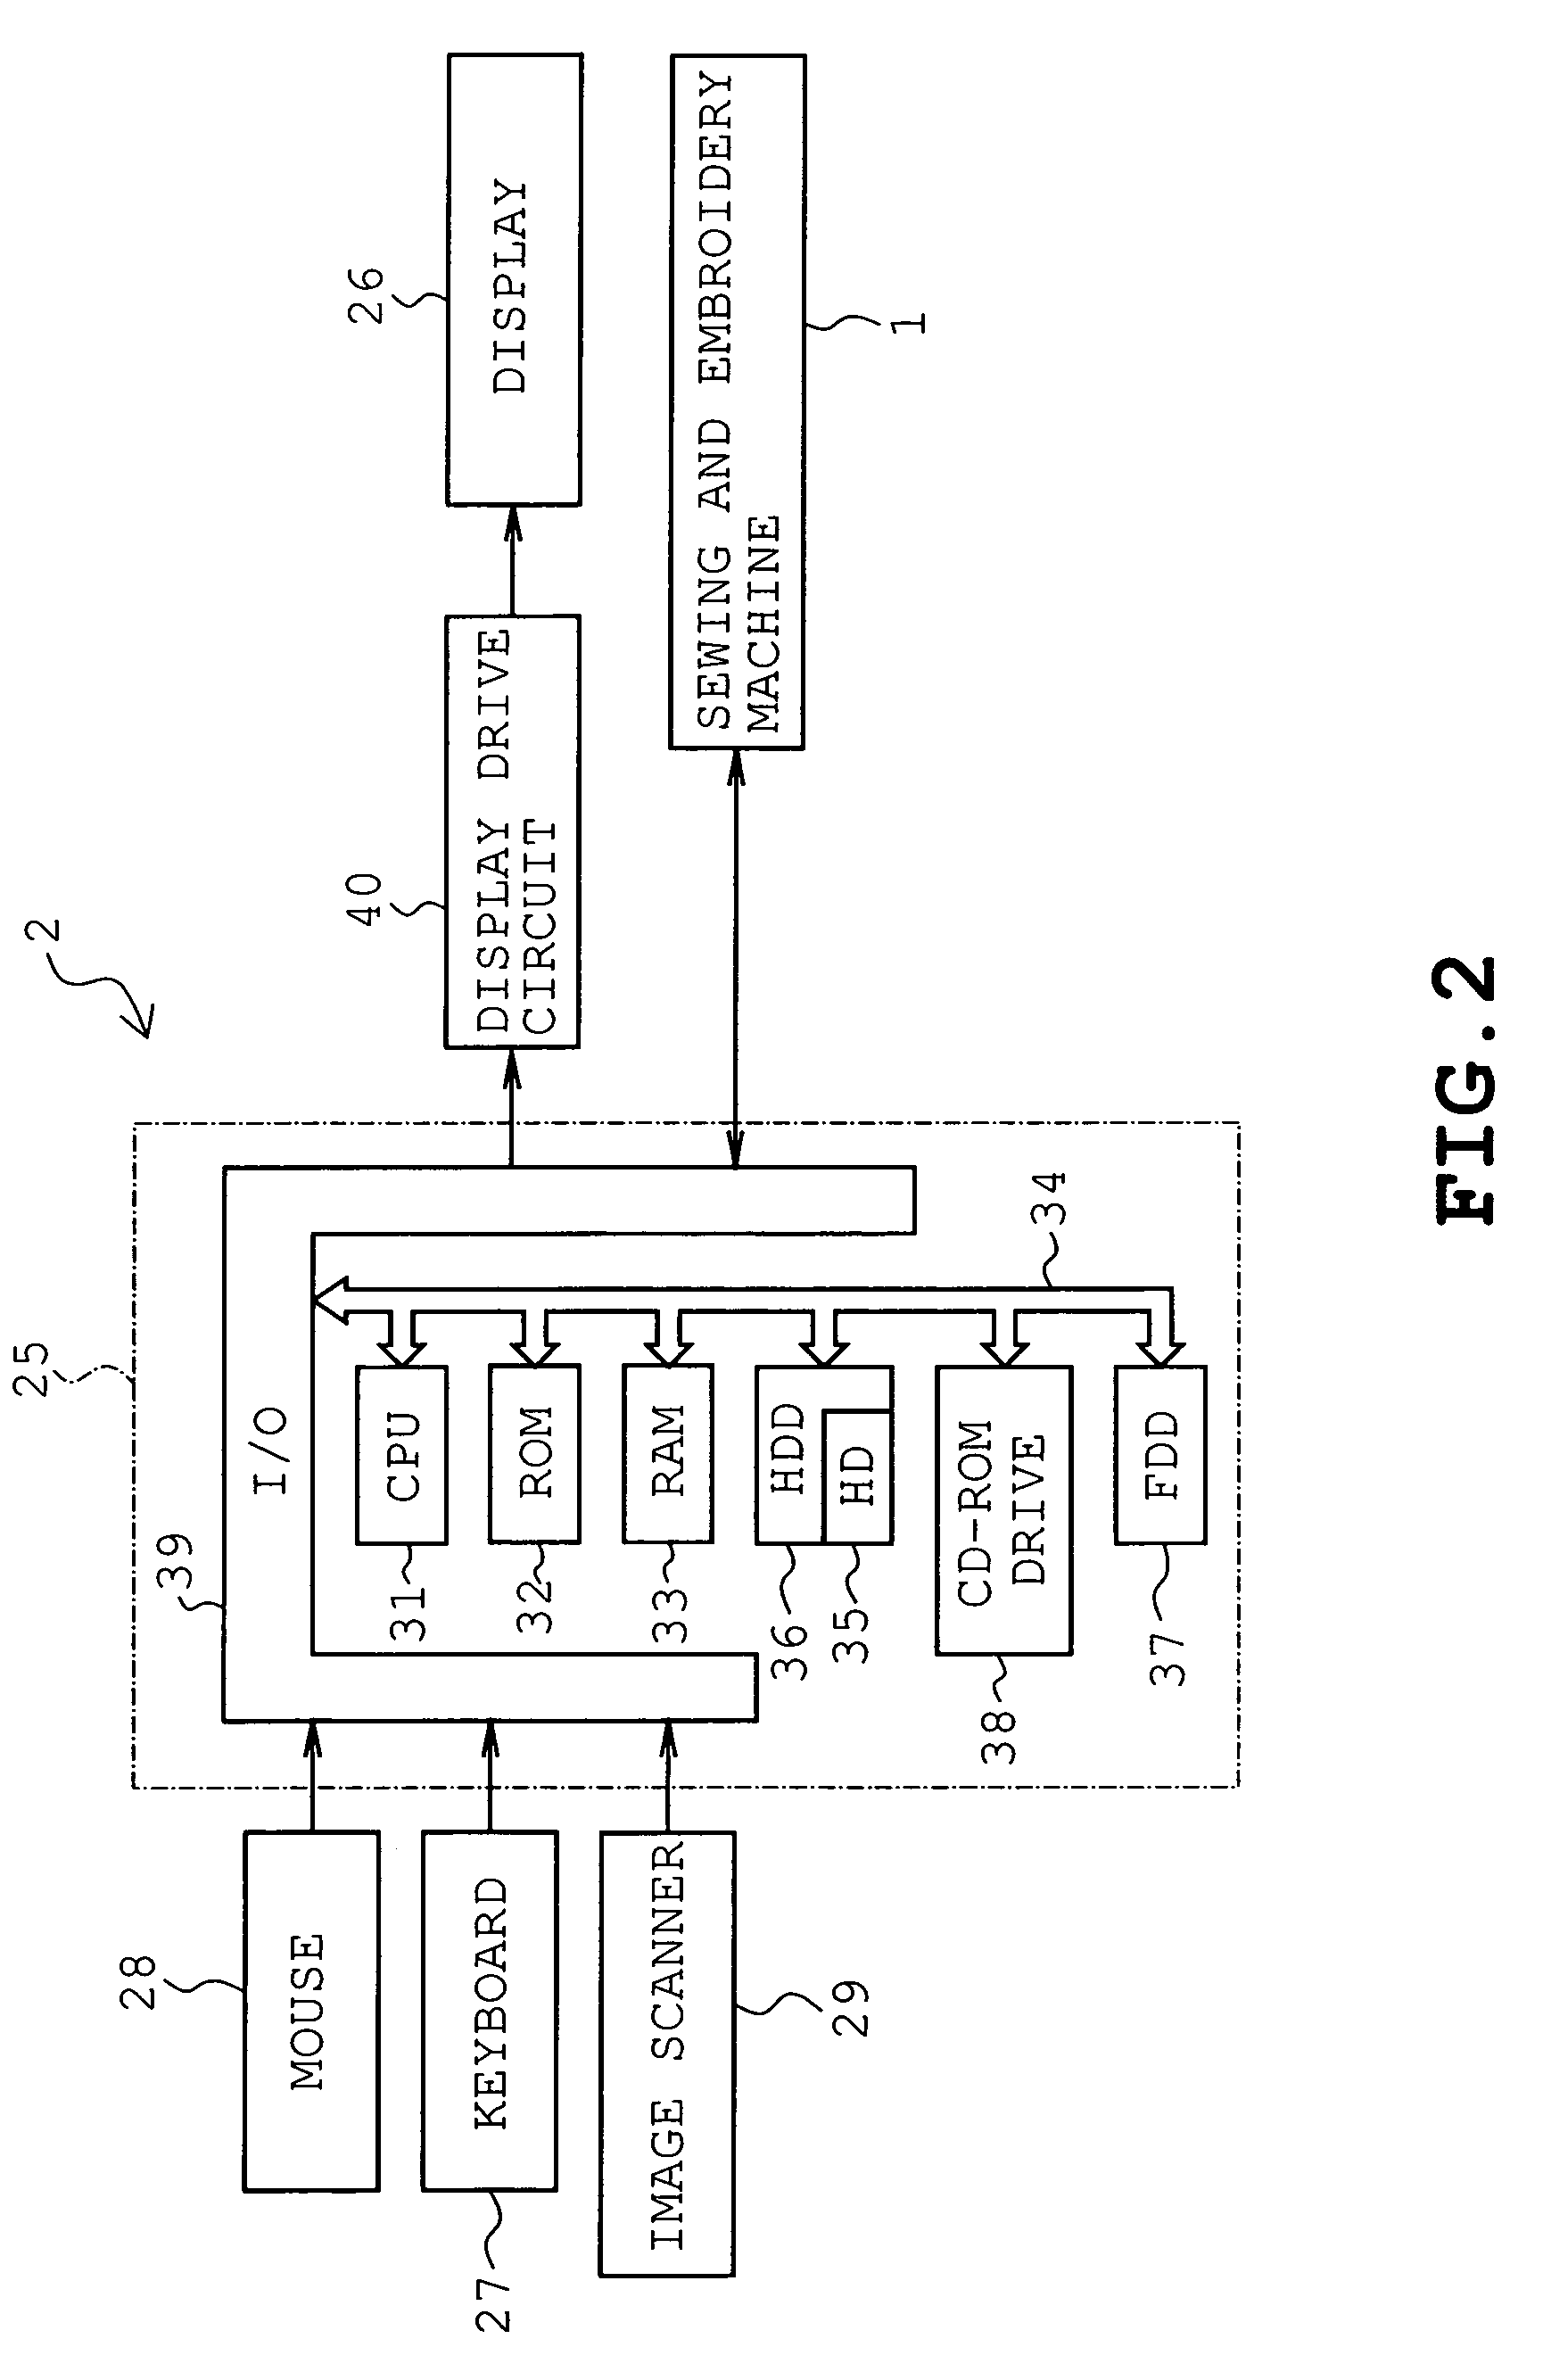 Embroidery data producing device and embroidery data producing program stored in a computer readable medium